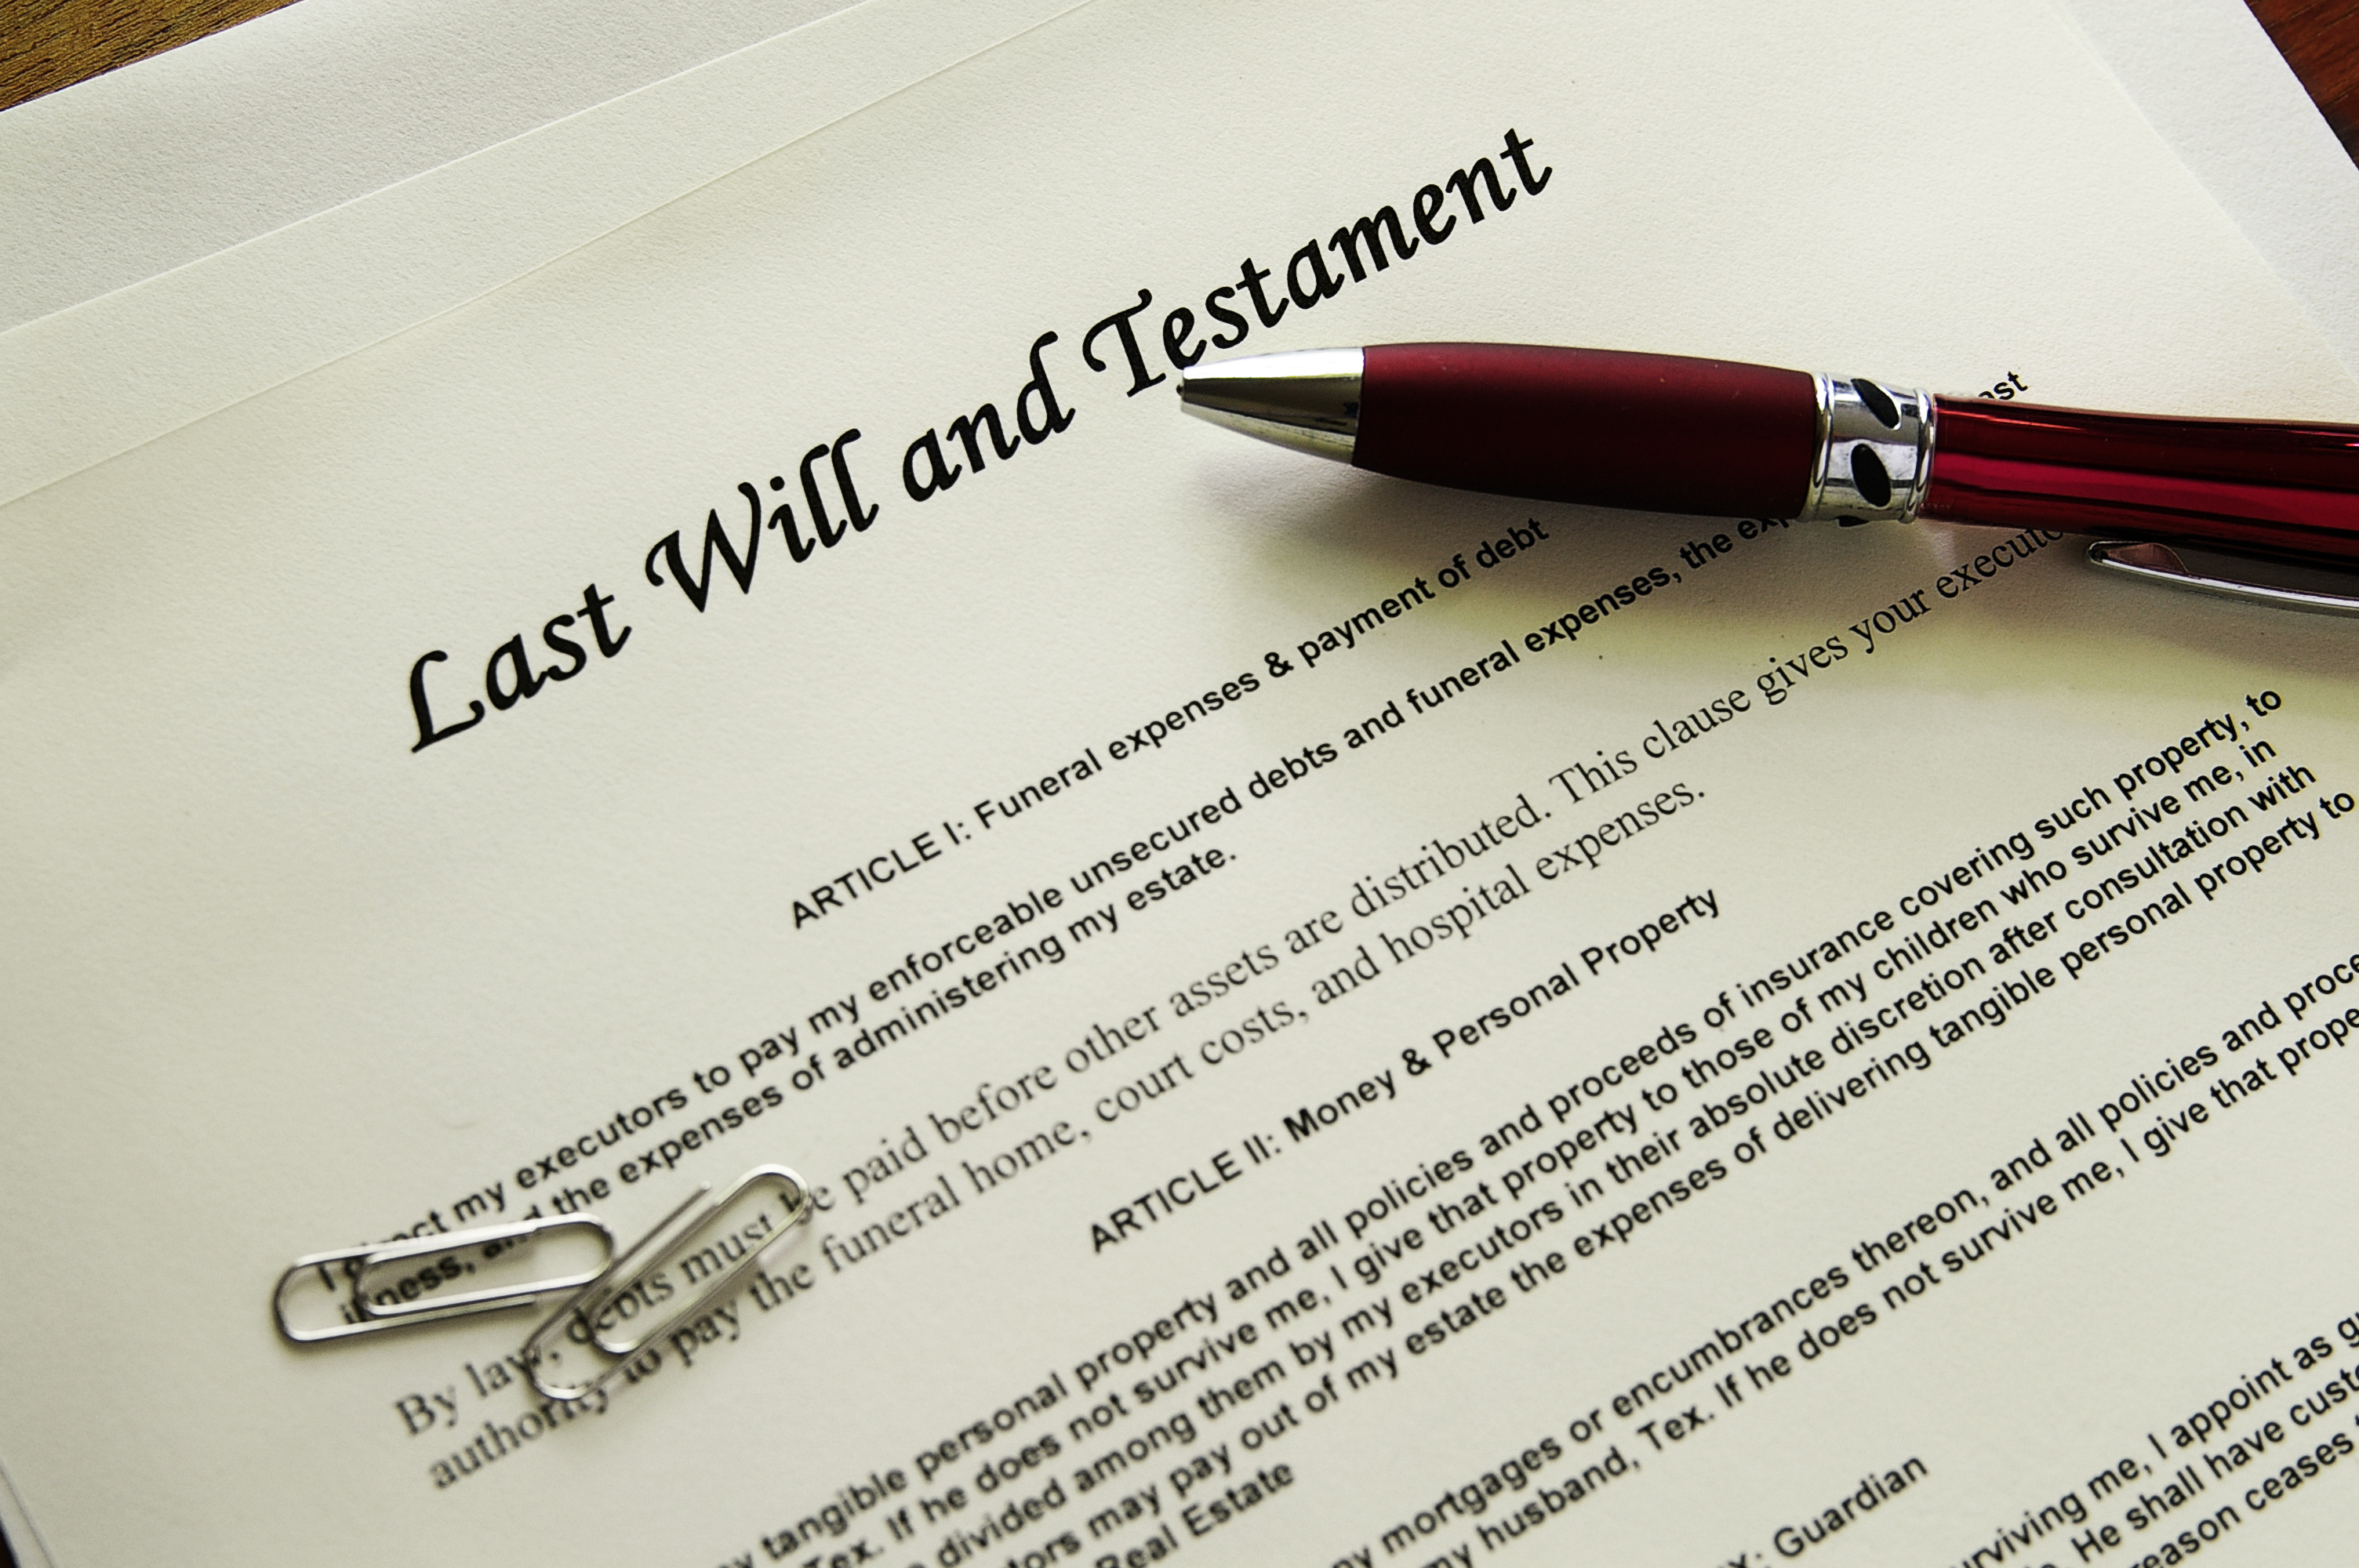 Will and Testament document | Source: Shutterstock